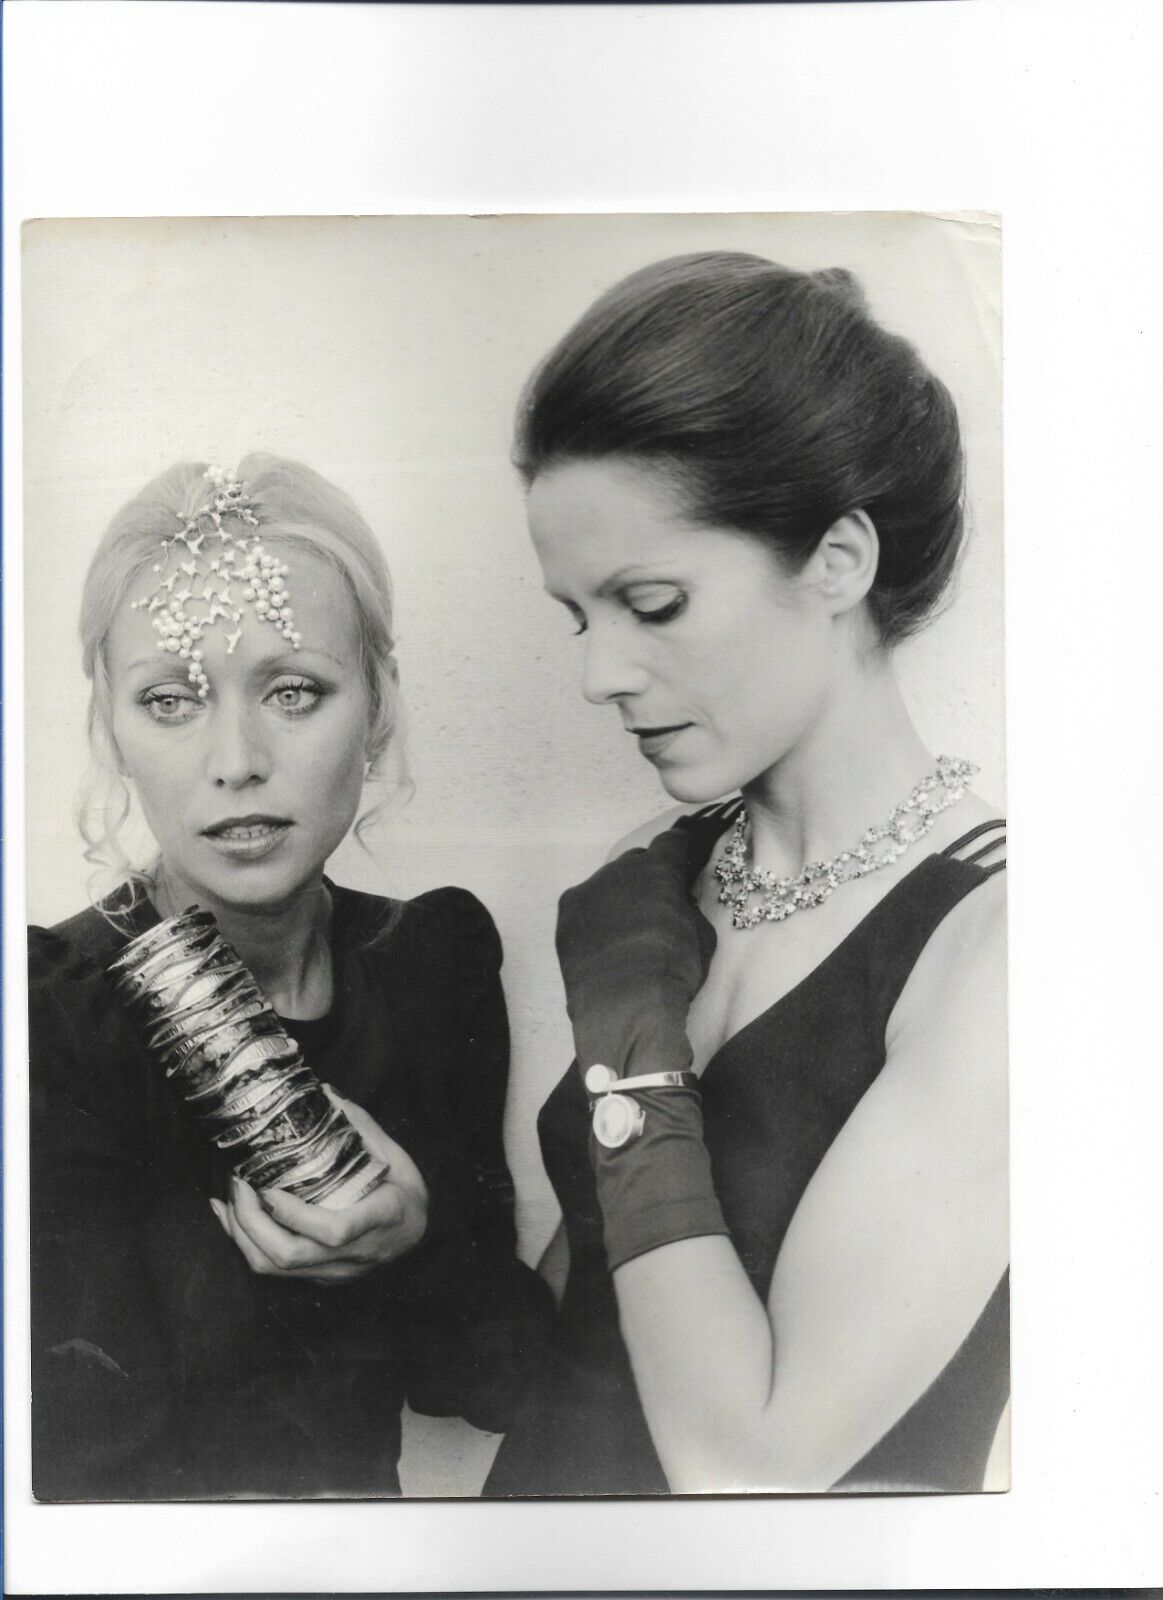 1970s GENEVA FOREMOST JEWELRY MODELS  GLAMOUR EXQUISITE ORIG VINTAGE Photo 168